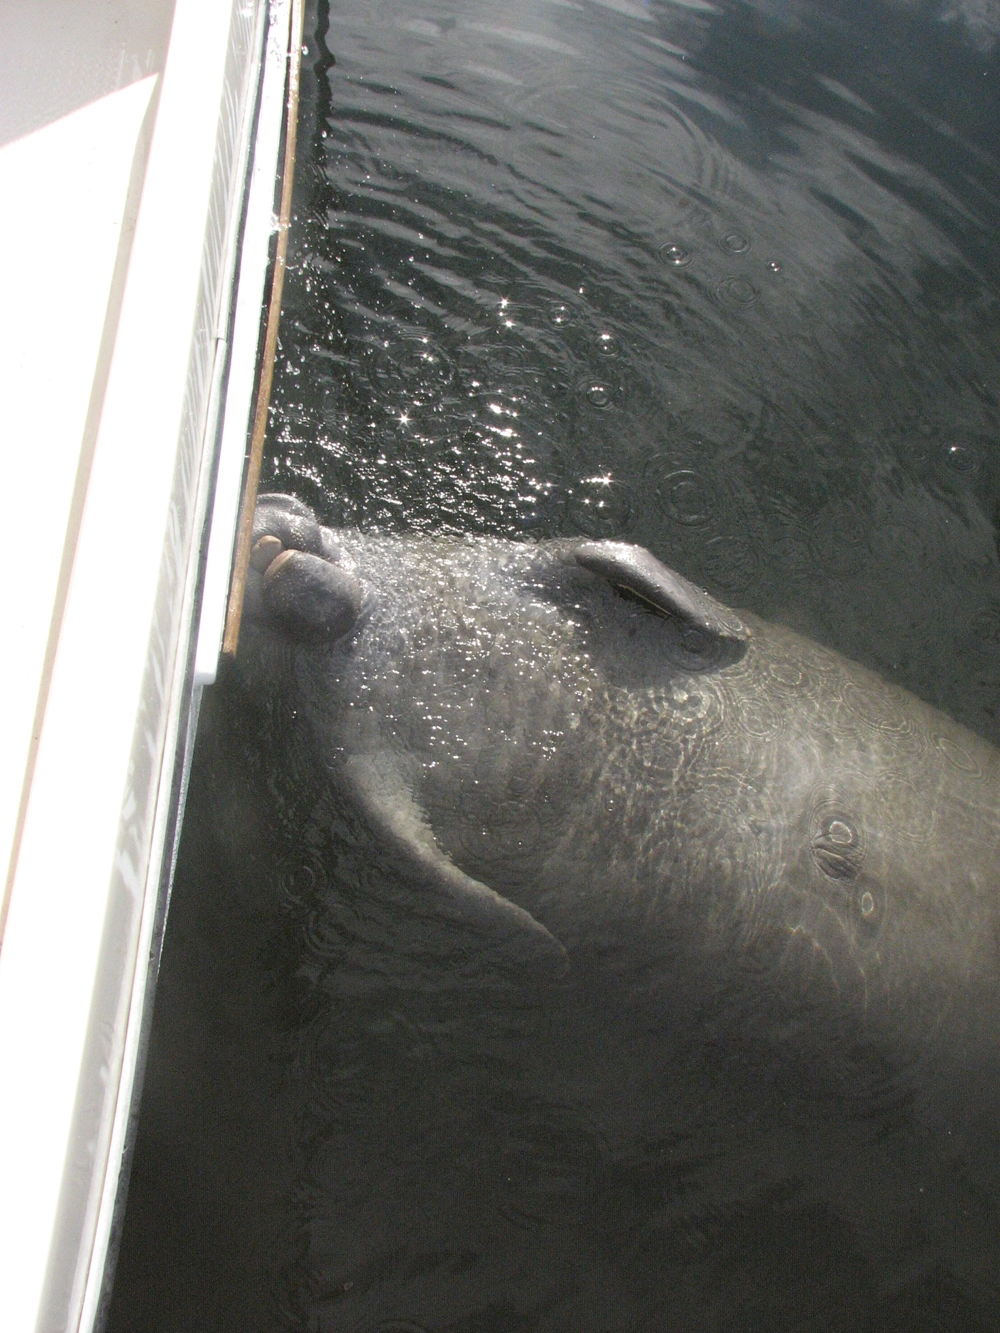 Manatee Drinking from Kitchen Outlet